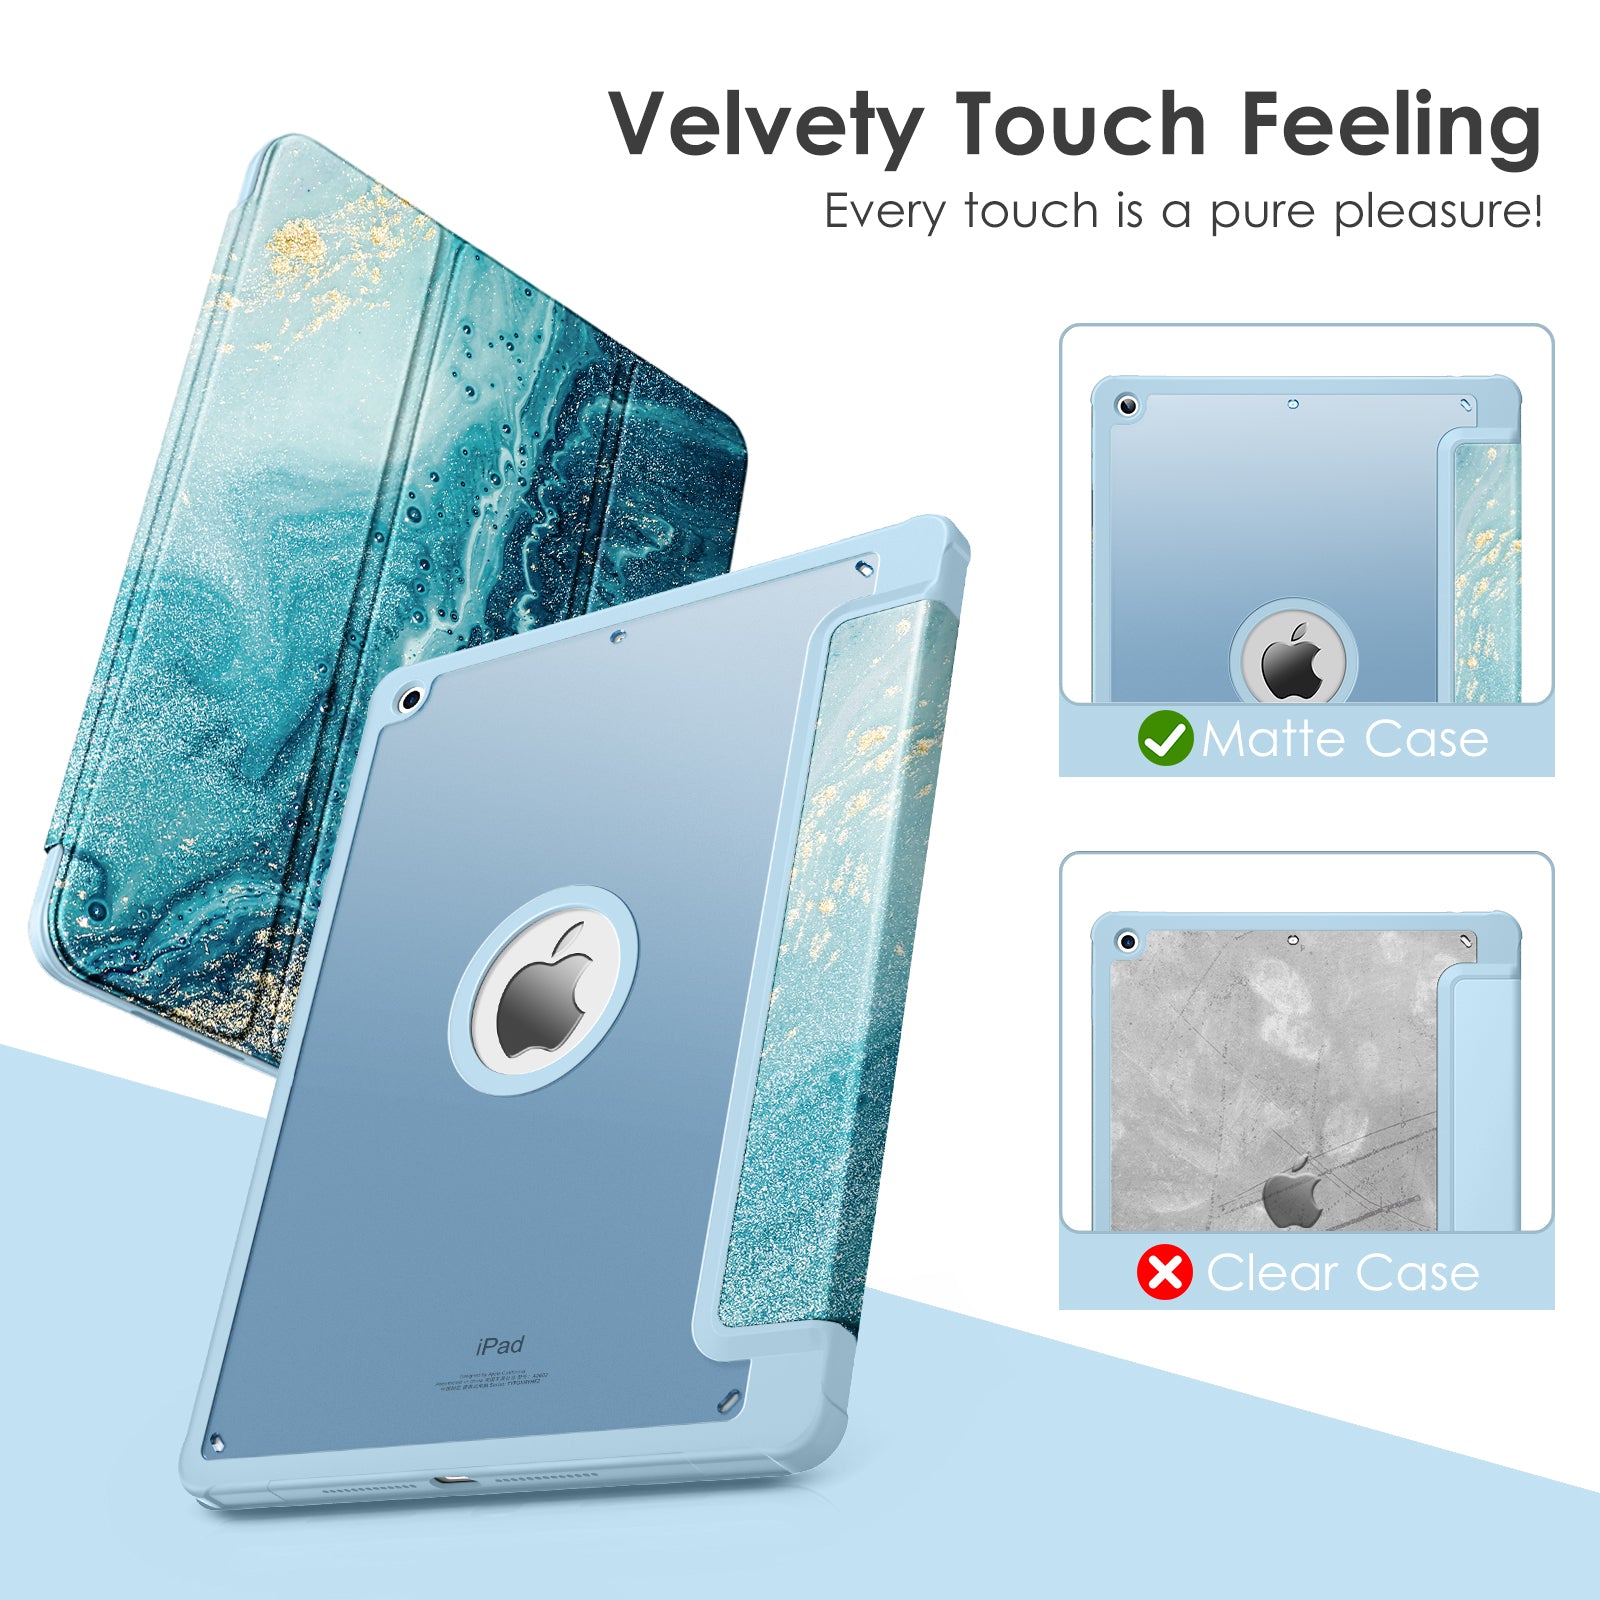 VIKESI Smooth Matte Case for iPad 9th / 8th / 7th Generation 10.2 inch (2021/2020/2019 Released), TPU Shockproof Frame, Built-in Pencil Holder,Support Auto Sleep/Wake - Light Blue